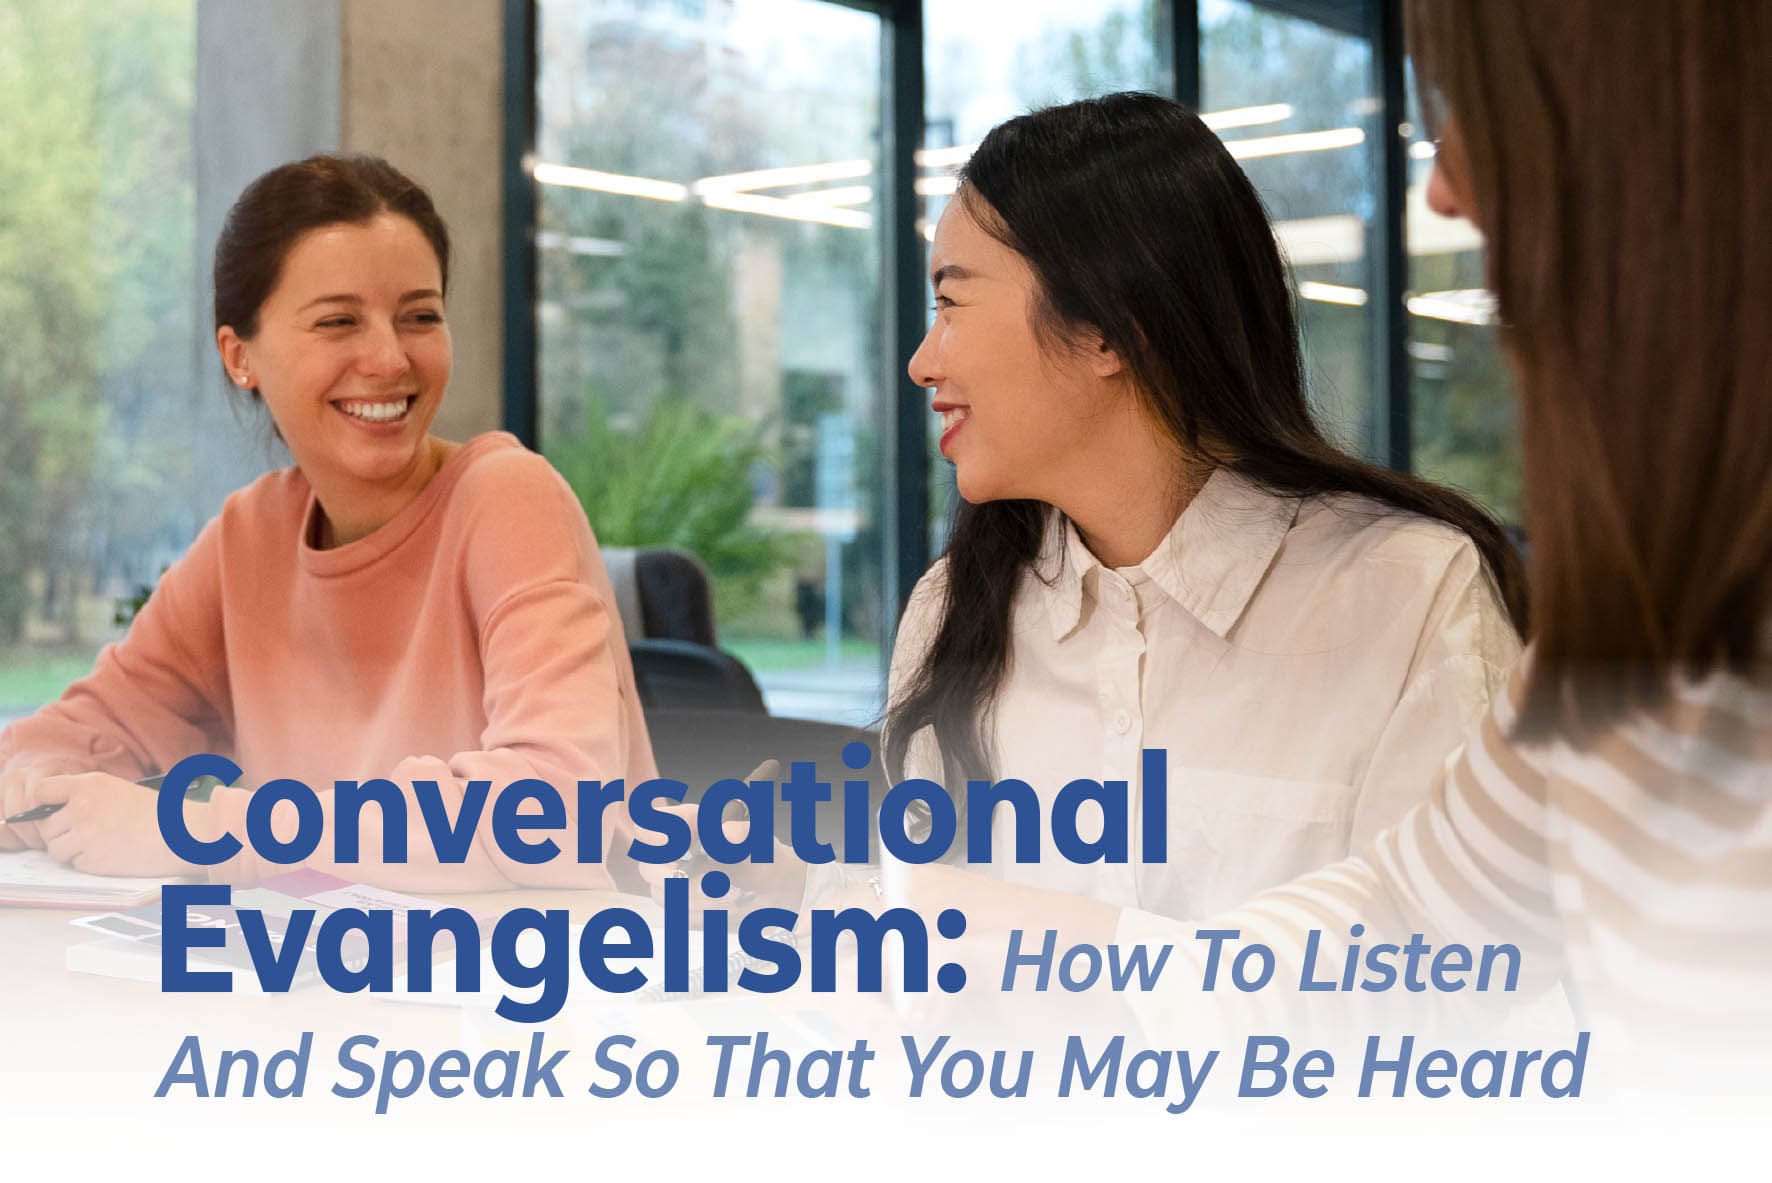  Conversational Evangelism:How To Listen And Speak So That You May Be Heard